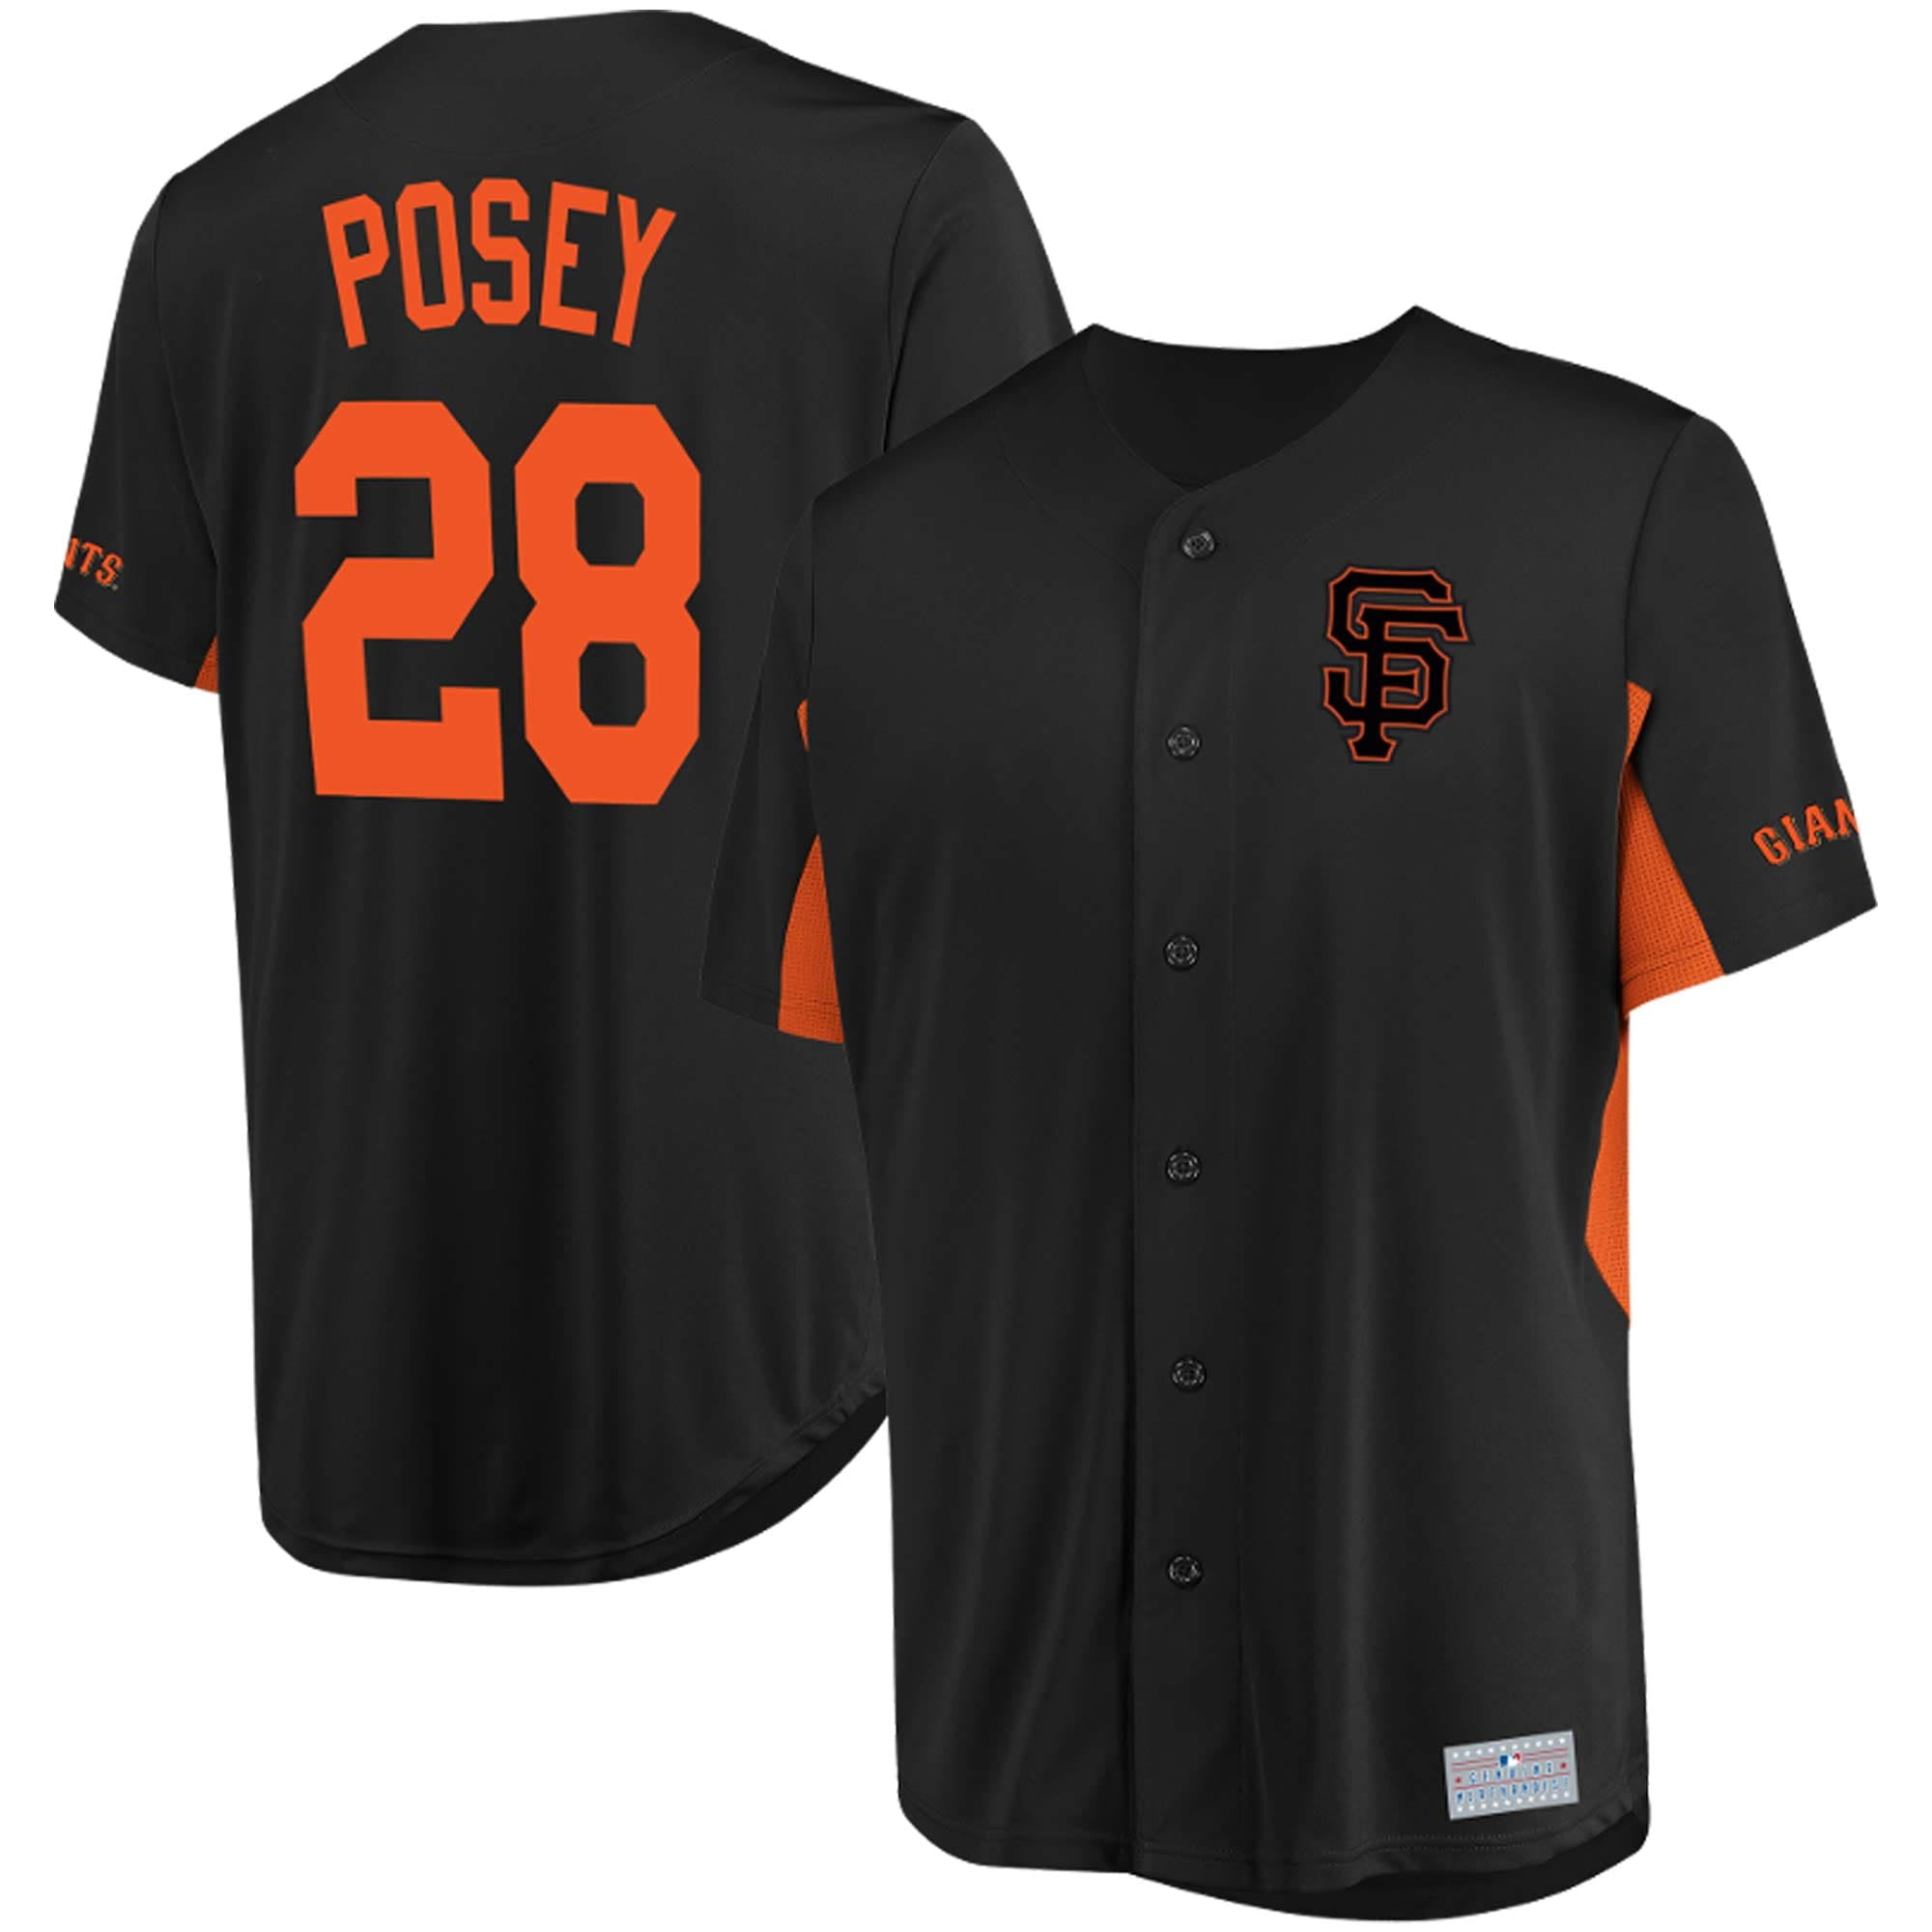 Buster Posey San Francisco Giants Majestic MLB Jersey ...